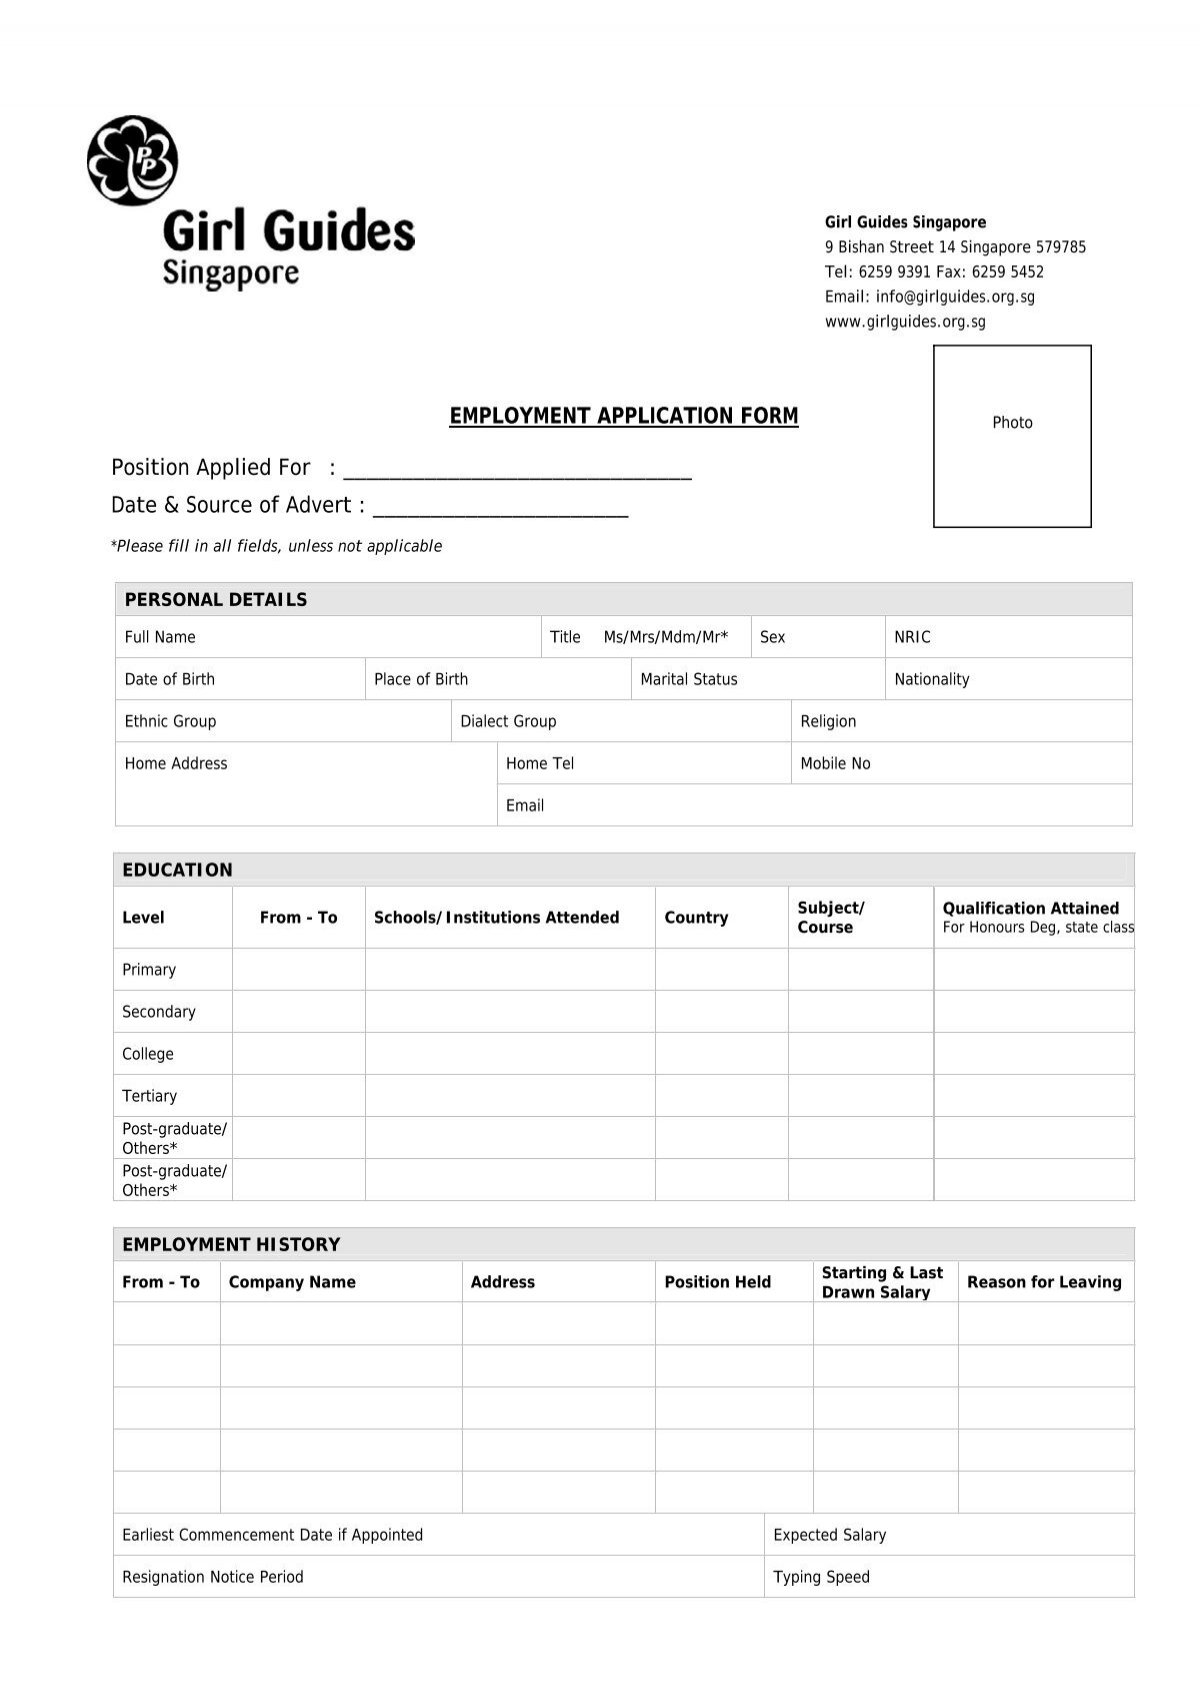 Employment Application Form Girl Guides Singapore 8934